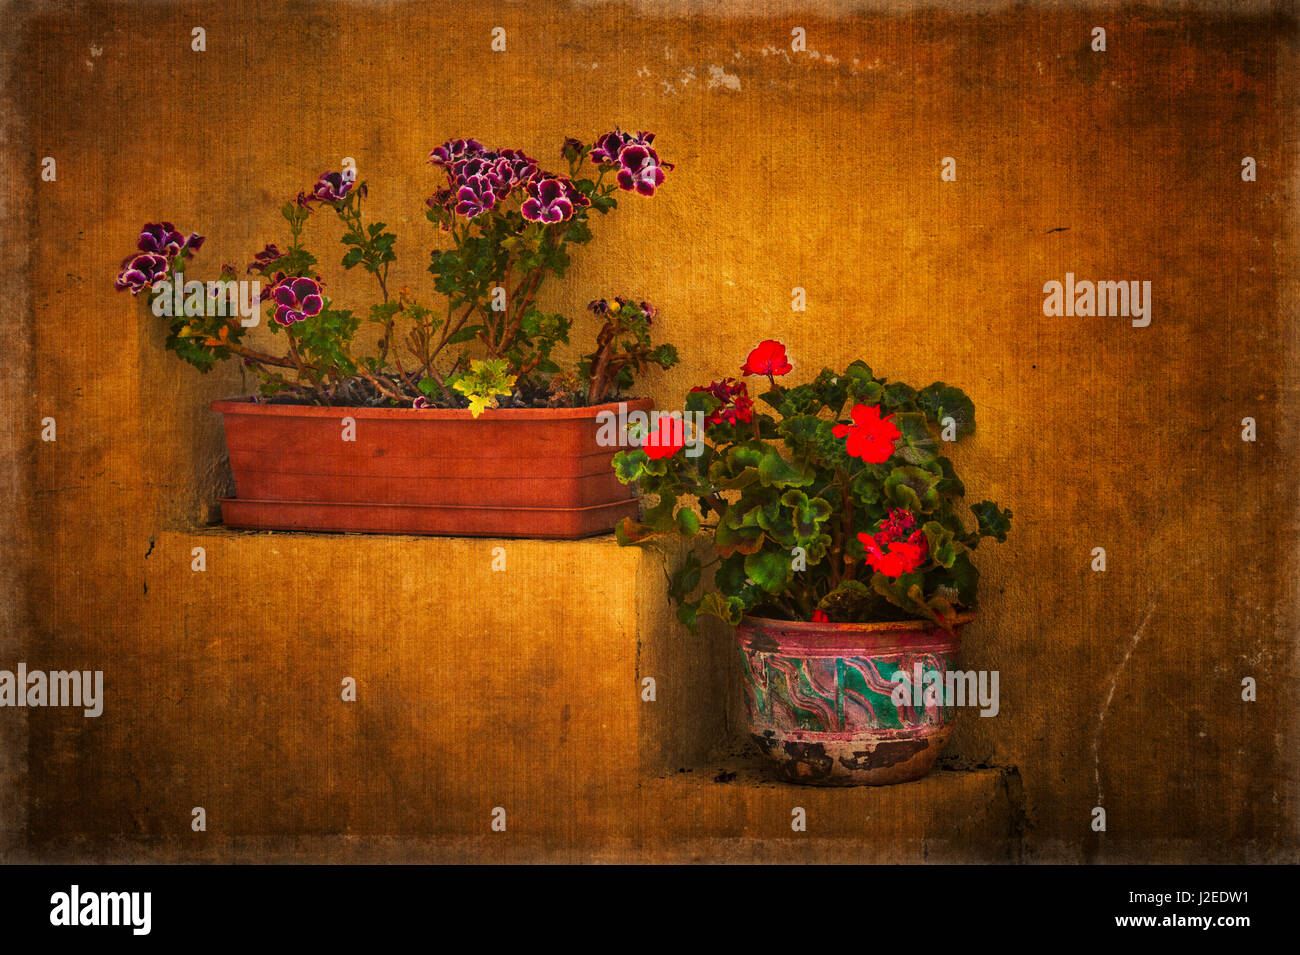 Stepped flower boxes with texture Stock Photo